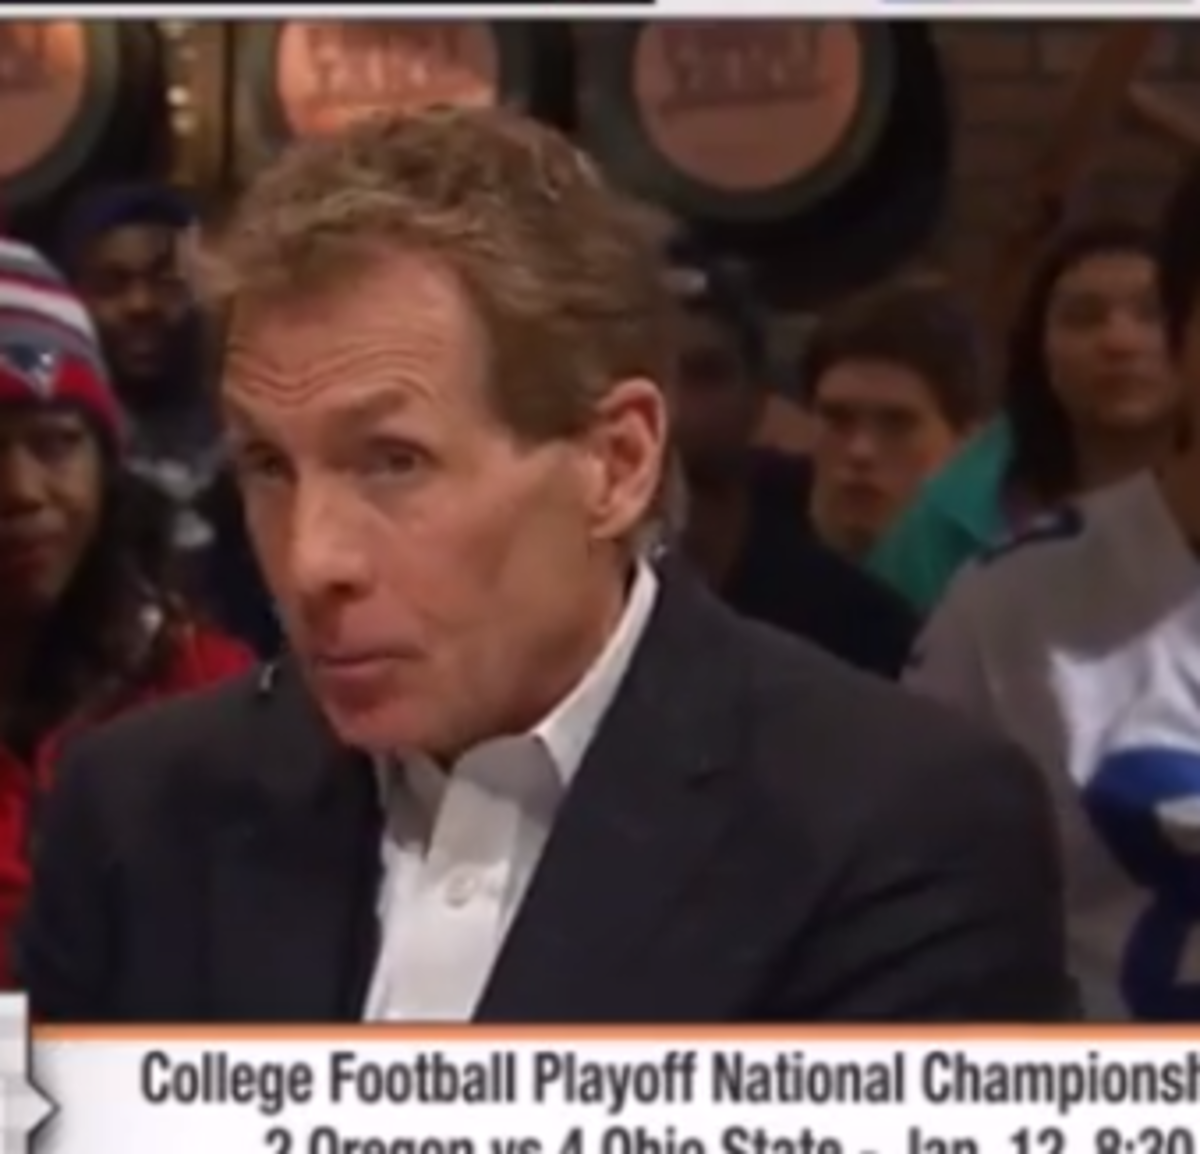 Skip Bayless discusses College Football Playoff.